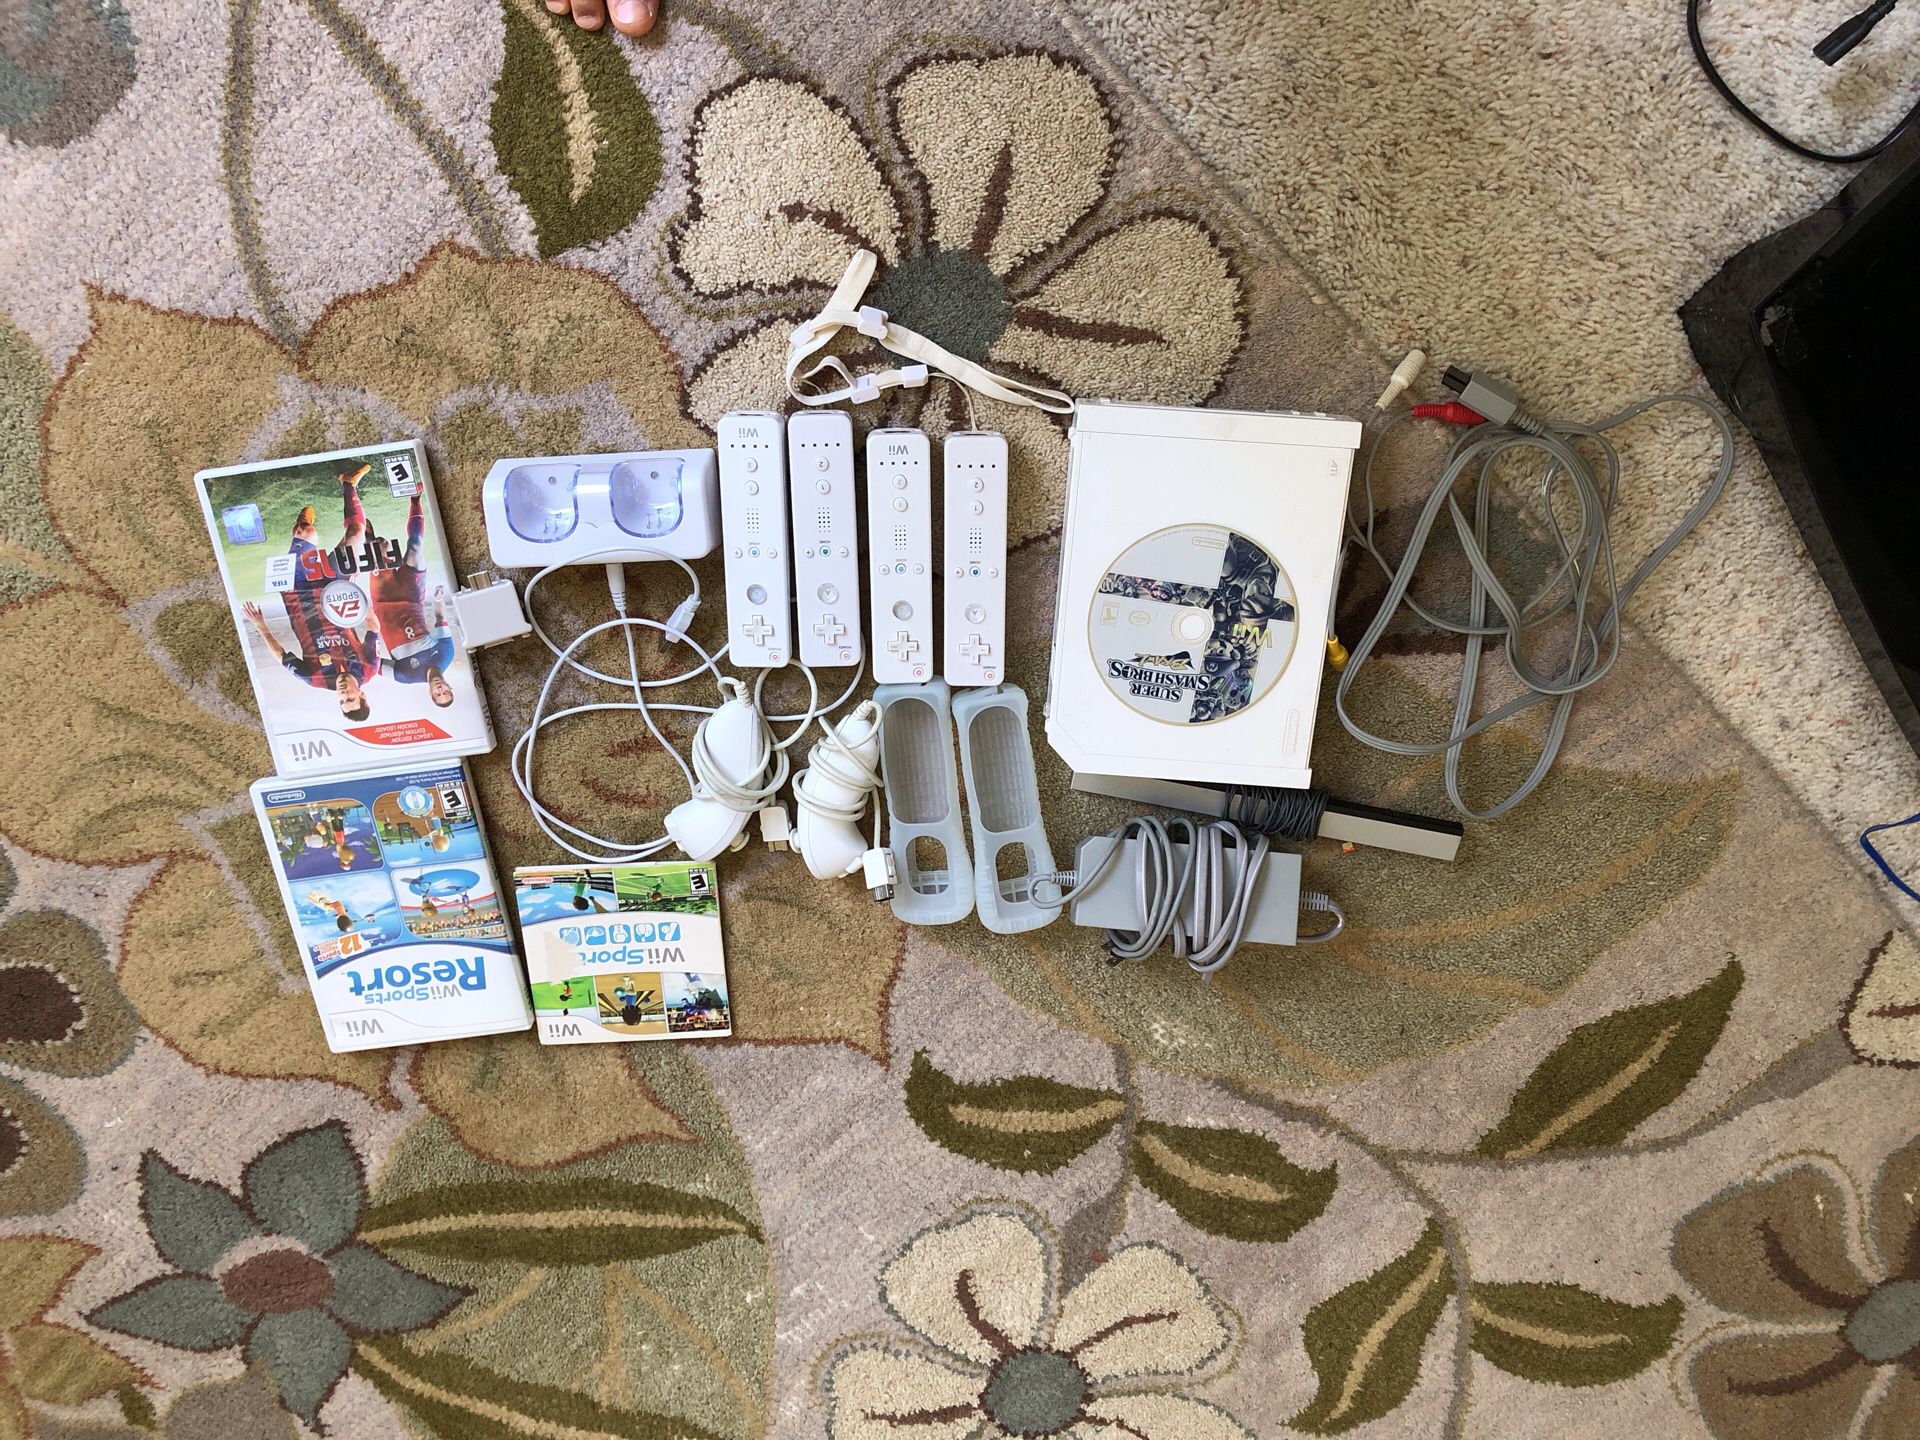 Nintendo wii with super smash bros brawl,wii sports resort,fifa 15 and wii sports and 4 controllers,2 slot controller charger, 1 wii motion plus, 2 n